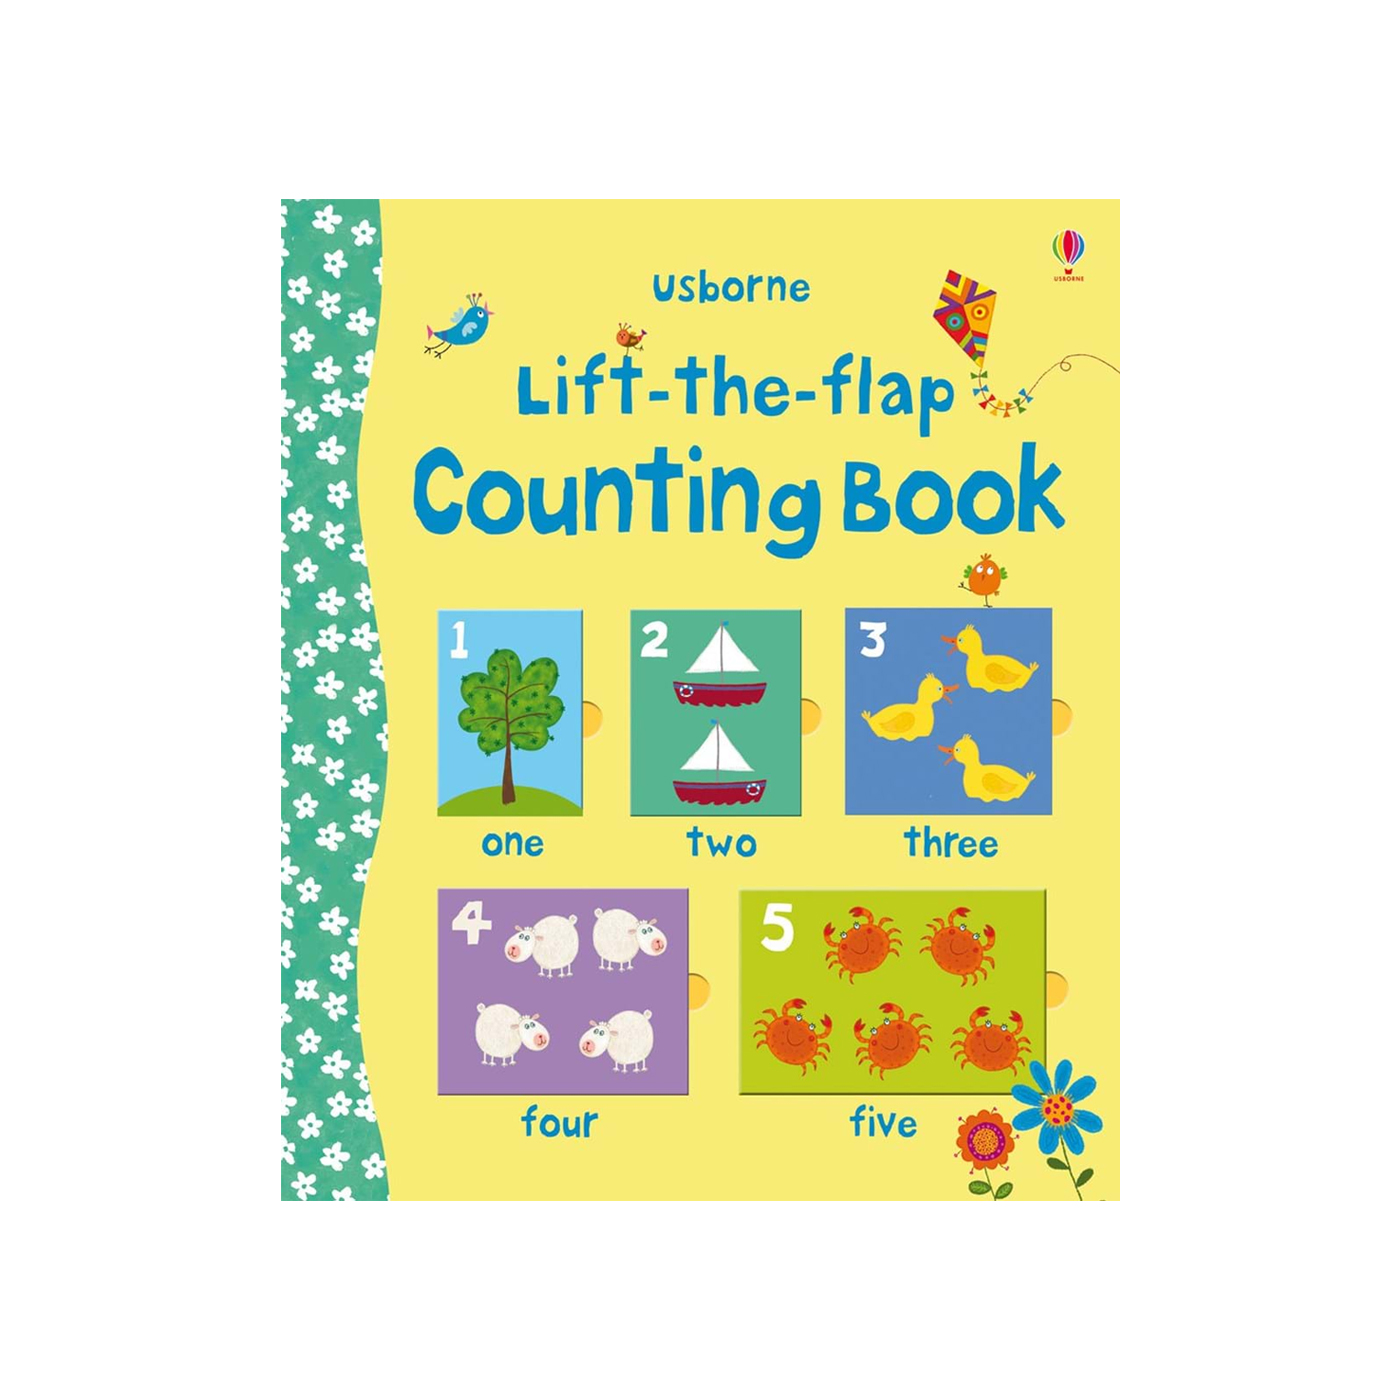  Lift-the-flap Counting Book